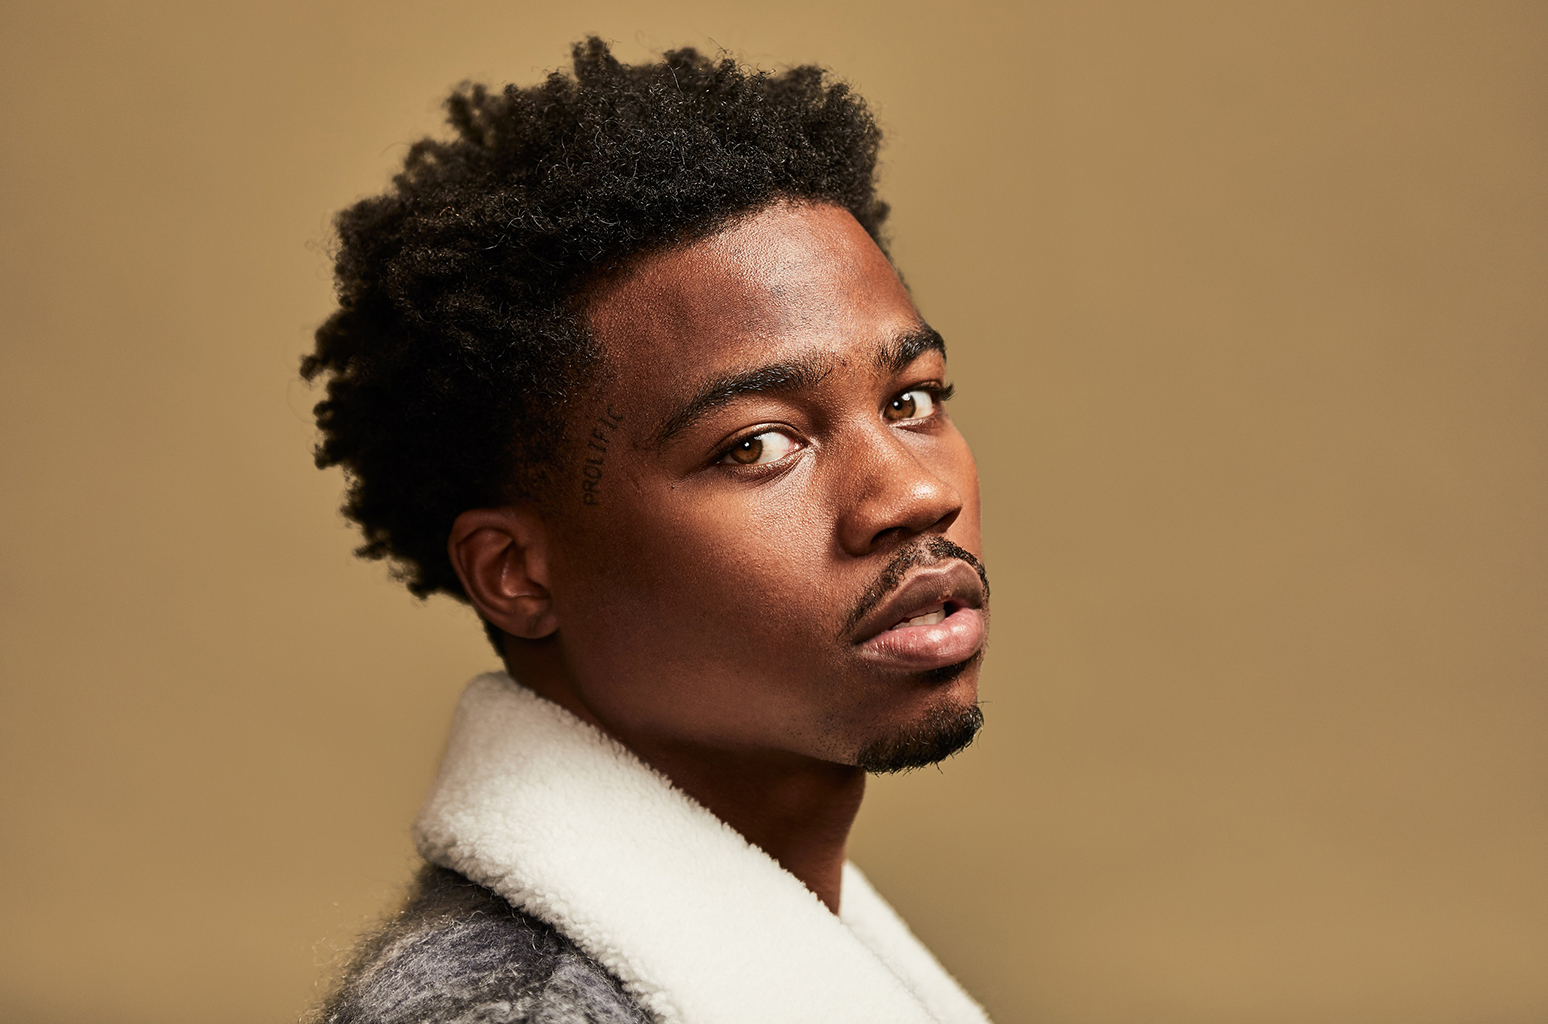 Roddy Ricch Hits No. 1 on Hot 100 Songwriters Chart, Thanks to 'The Box' & More